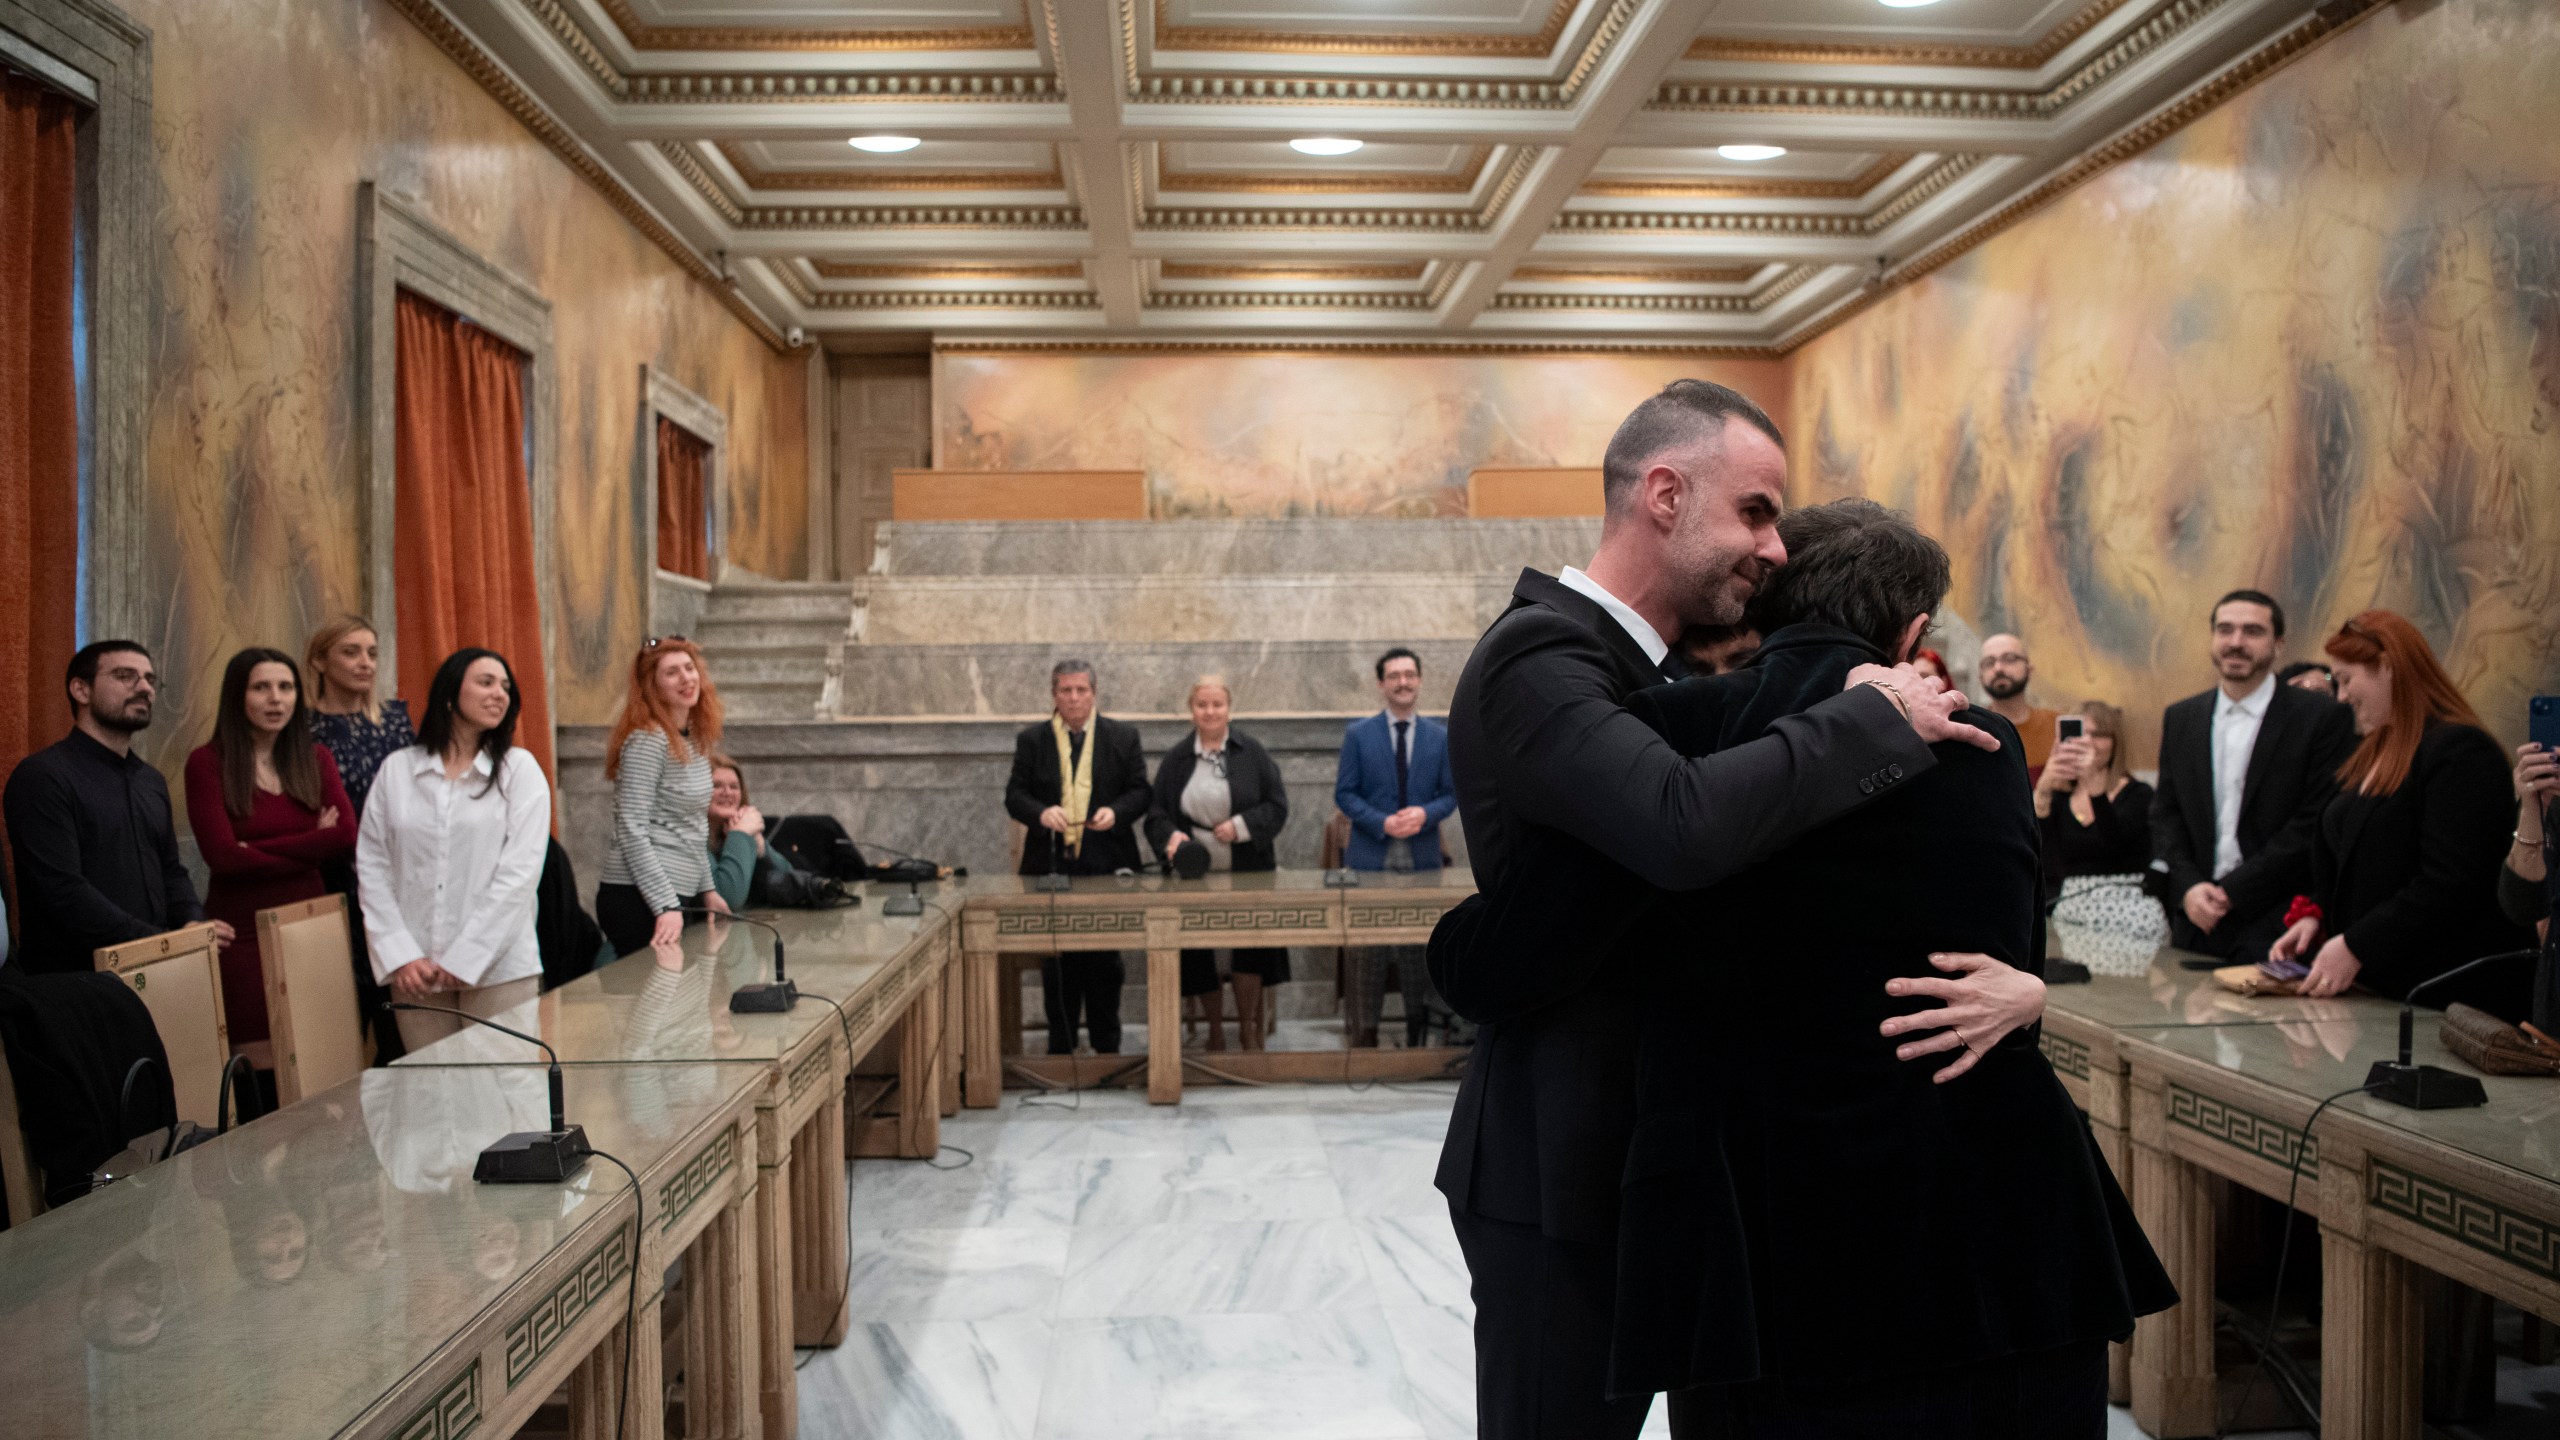 Lawyer Anastasios Samouilidis, left, hugs his husband, Greek author Petros Hadjopoulos, who uses the pen name Auguste Corteau, as guests watch, after their wedding at Athens City Hall, Greece, on Thursday, March 7, 2024. A Greek novelist and his partner on Thursday became the first male couple to be married in Athens' city hall following the legalization of same-sex marriage in Orthodox Christian Greece. (AP Photo/Michael Varaklas)